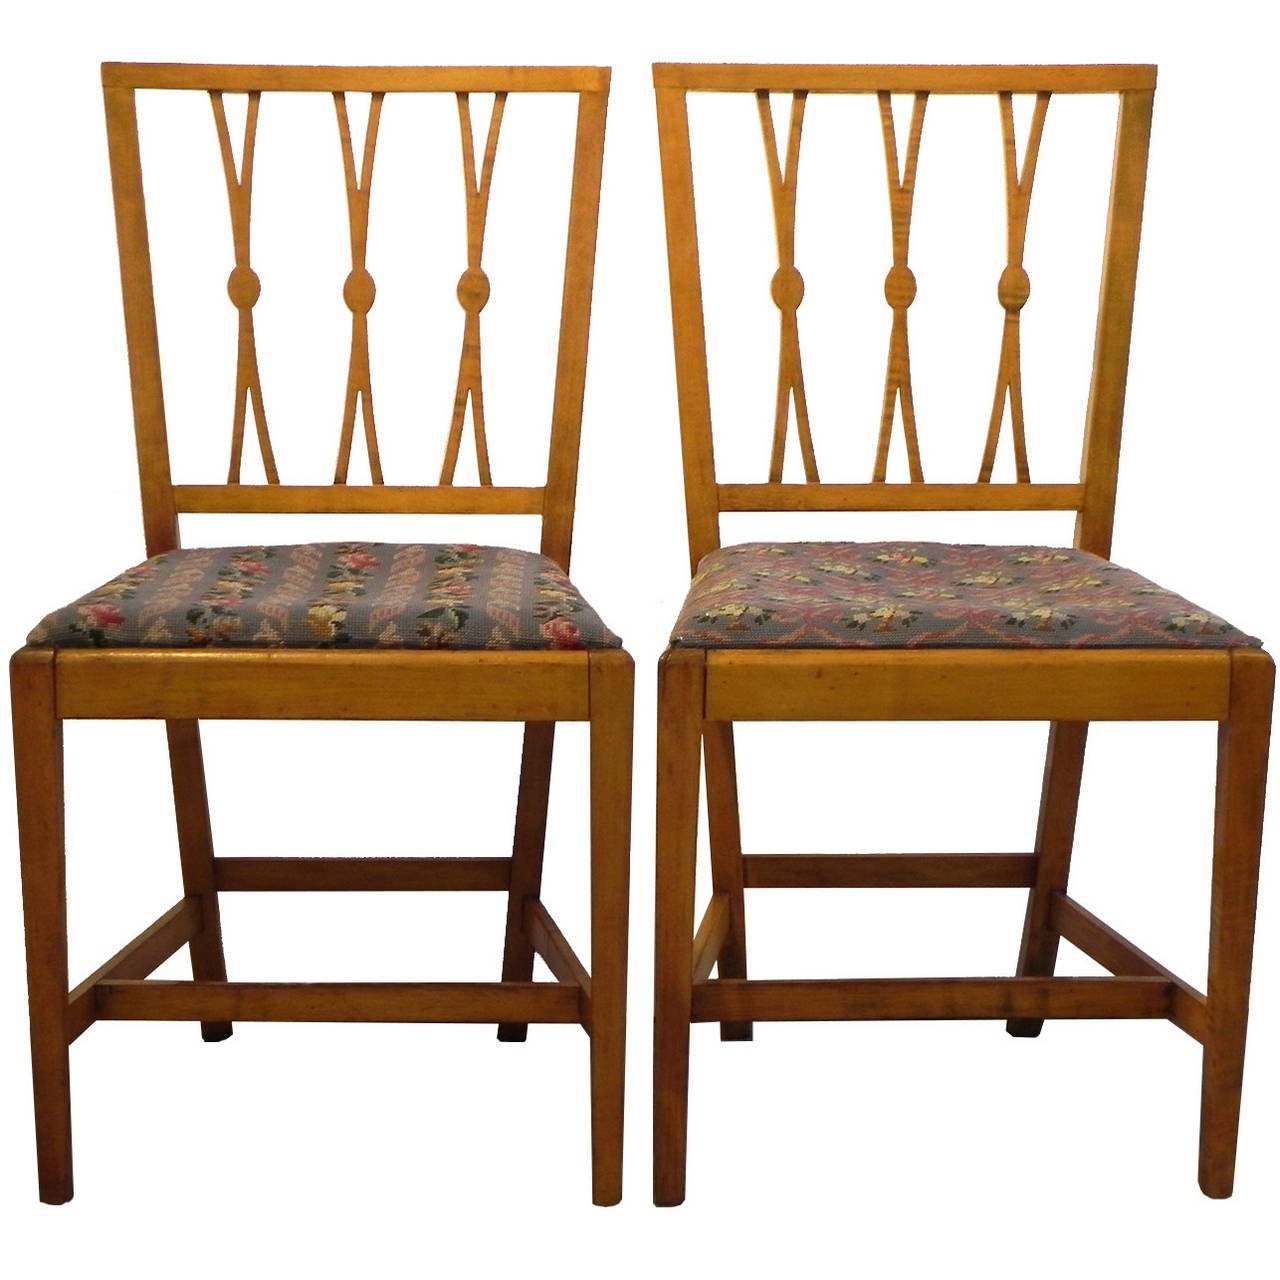 Pair of 18th c. Hepplewhite Maple Portsmouth Side Chairs For Sale